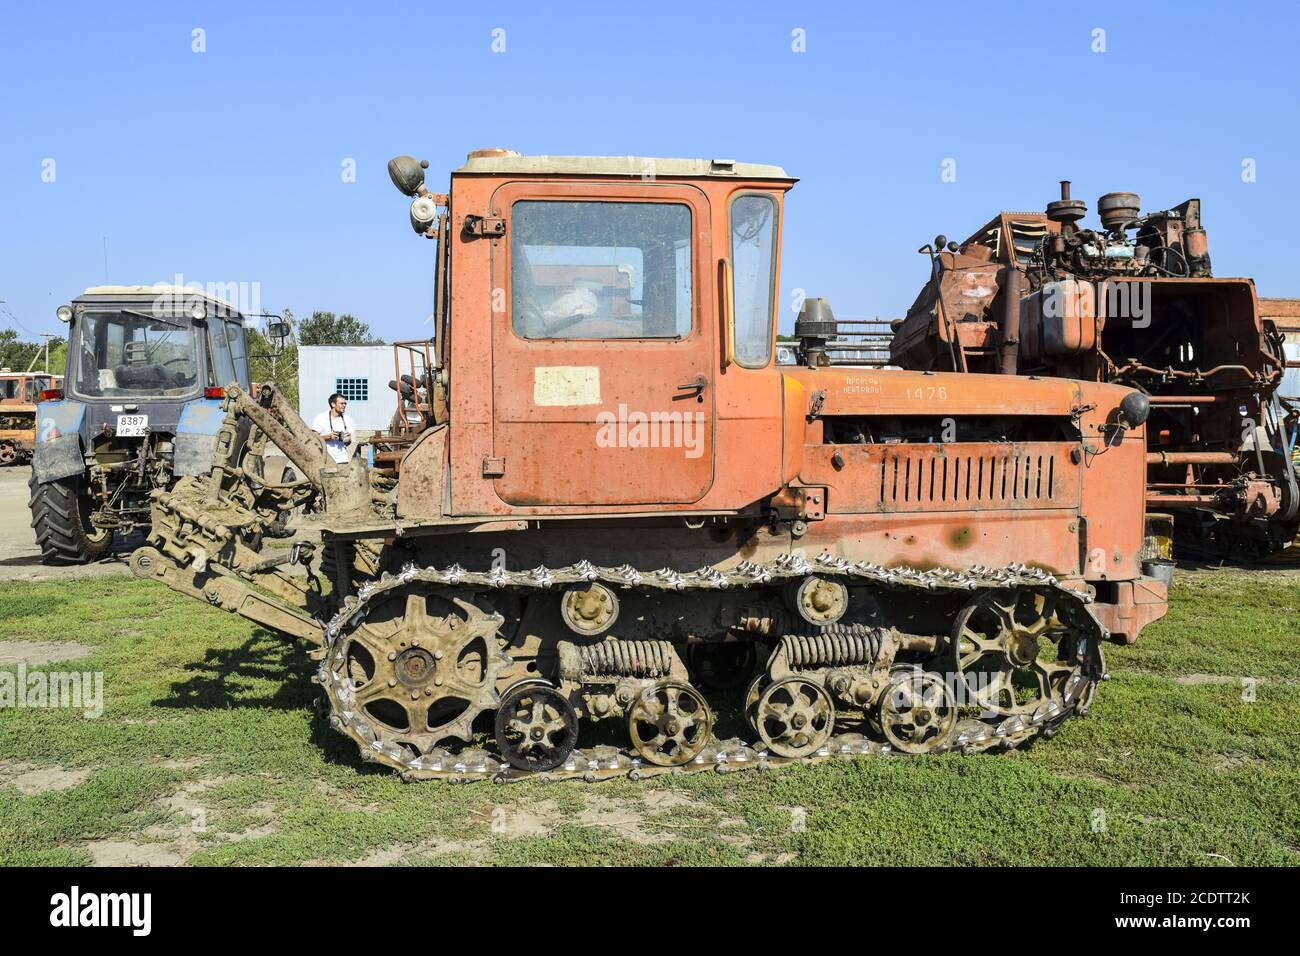 Tractor. Agricultural machinery. Stock Photo